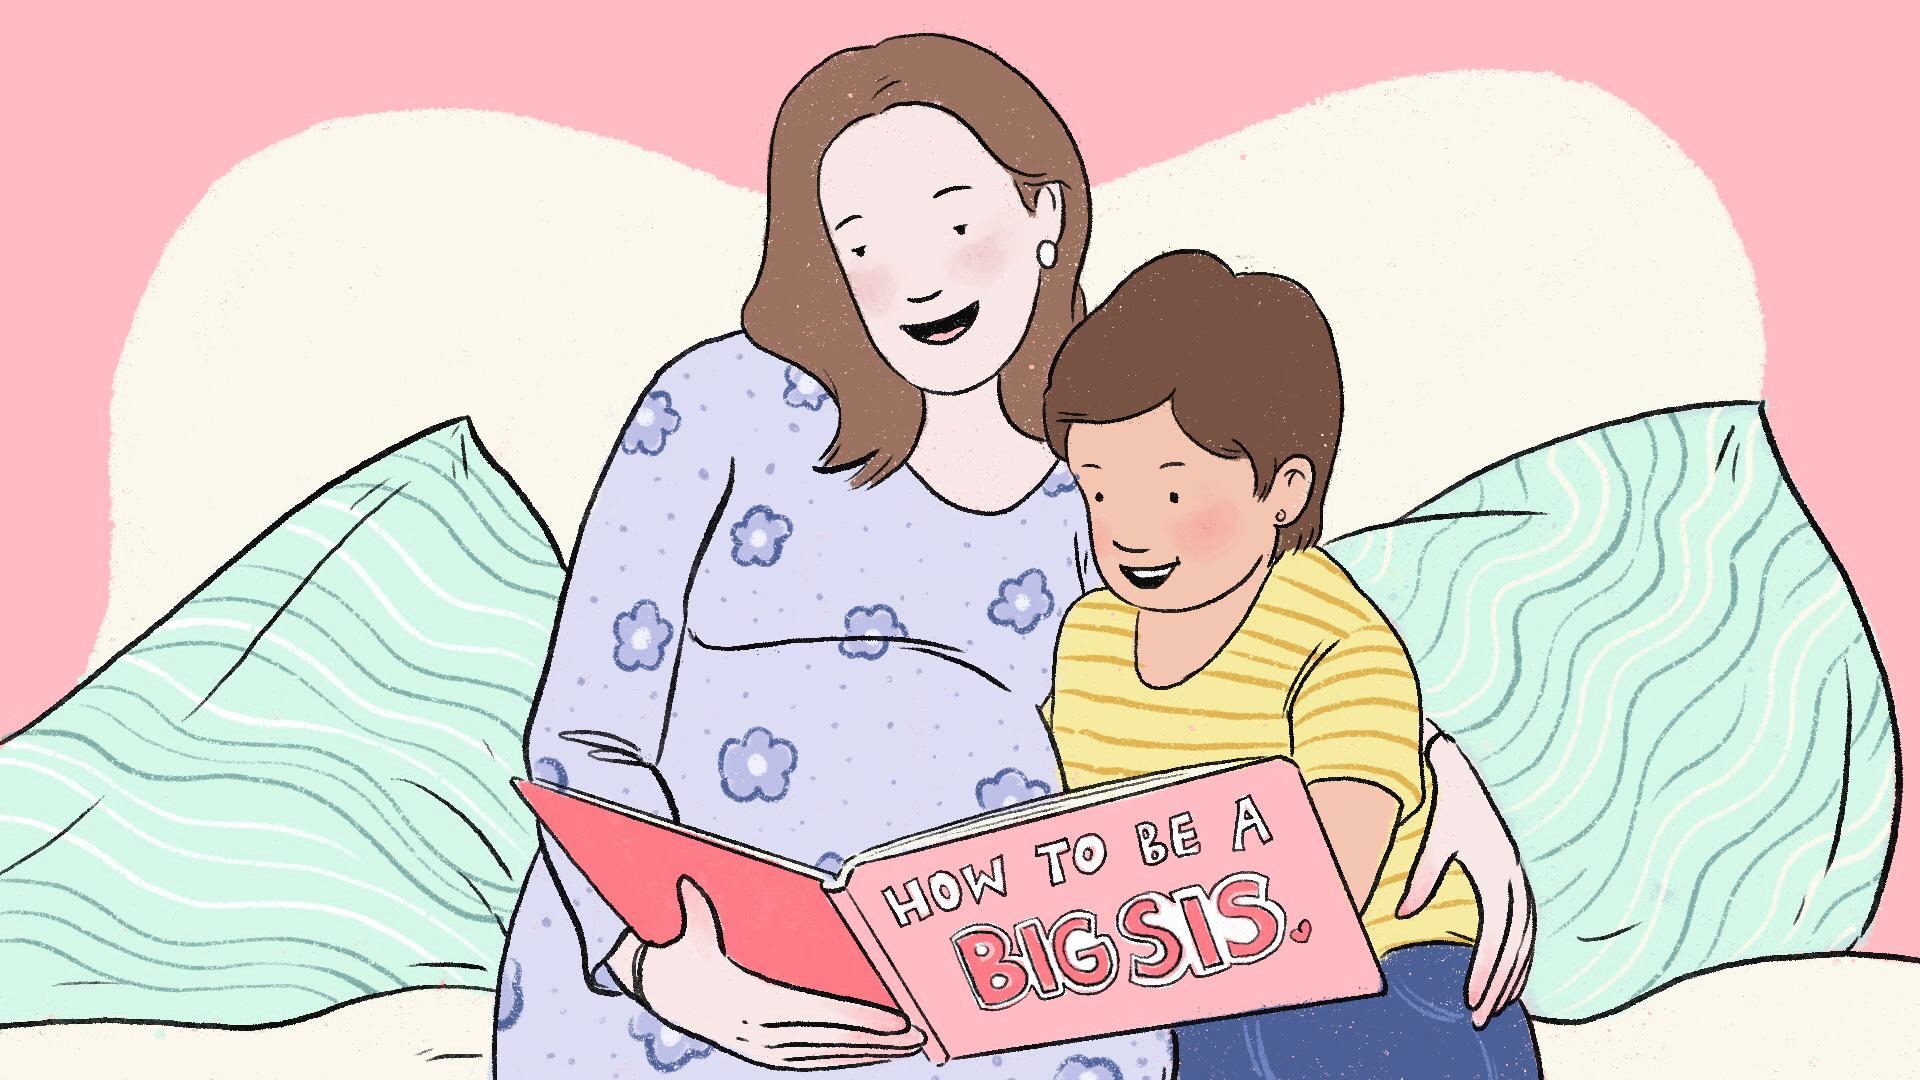 How to prepare your child for a new sibling